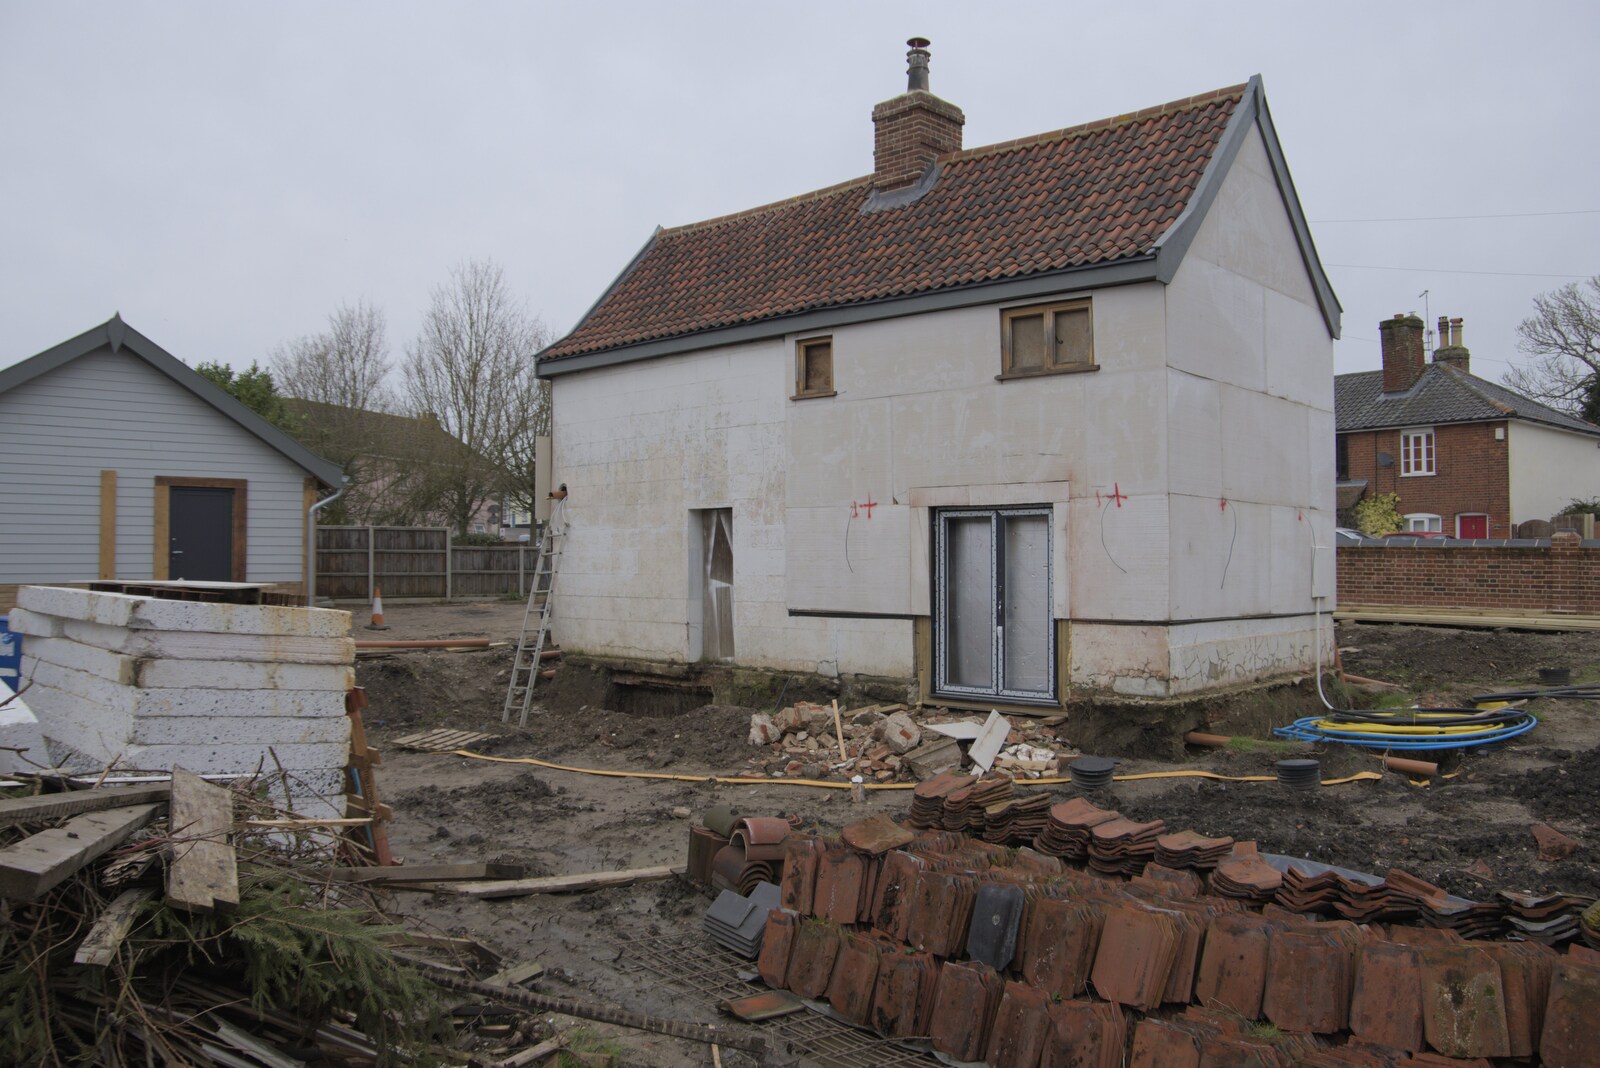 The stop/start house rebuild has stopped again from Palgrave Player's Wrap Party and a March Miscellany, Suffolk - 6th March 2024